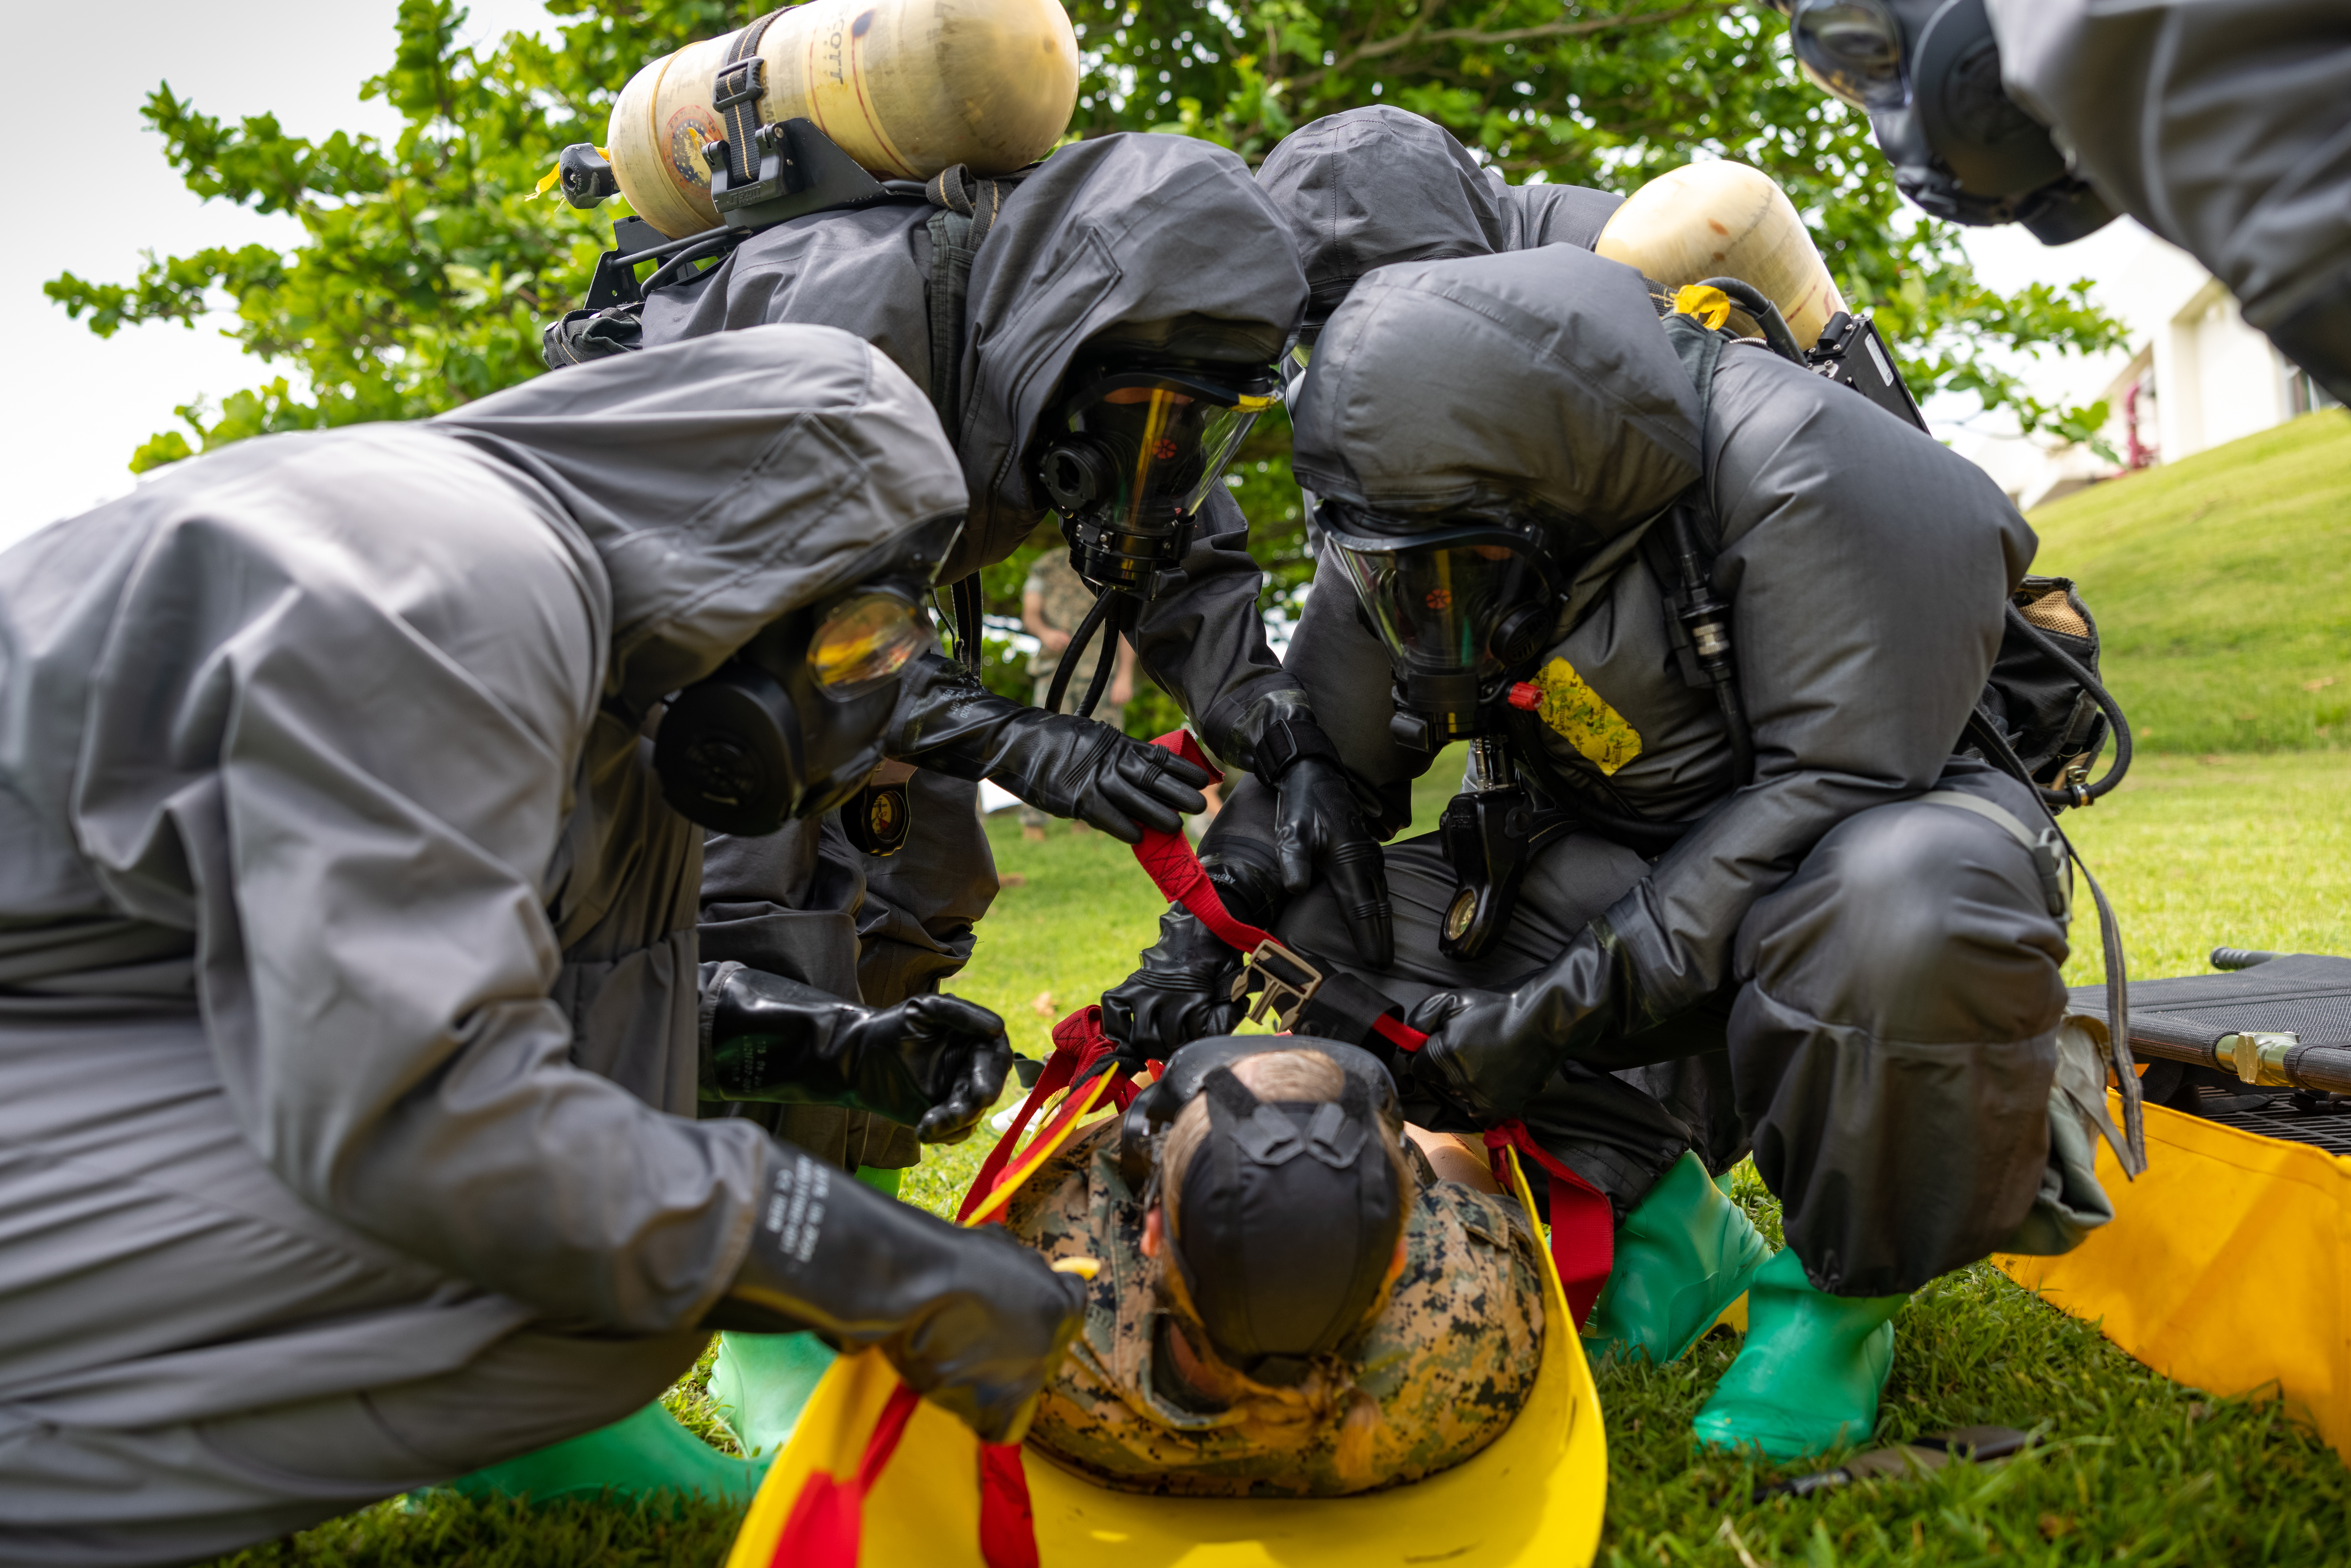 U.S. Marines provide aid to a simulated casualty during a Chemical, Biological, Radiological, and Nuclear (CBRN) defense site control training exercise on Camp Courtney, Okinawa, Japan, Sept. 8, 2023. CBRN defense specialists are responsible for conducting chemical detection and identification, biological agent collection, decontamination procedures, and first aid for unit personnel. The Marines are with Headquarters Battalion, 3d Marine Division.